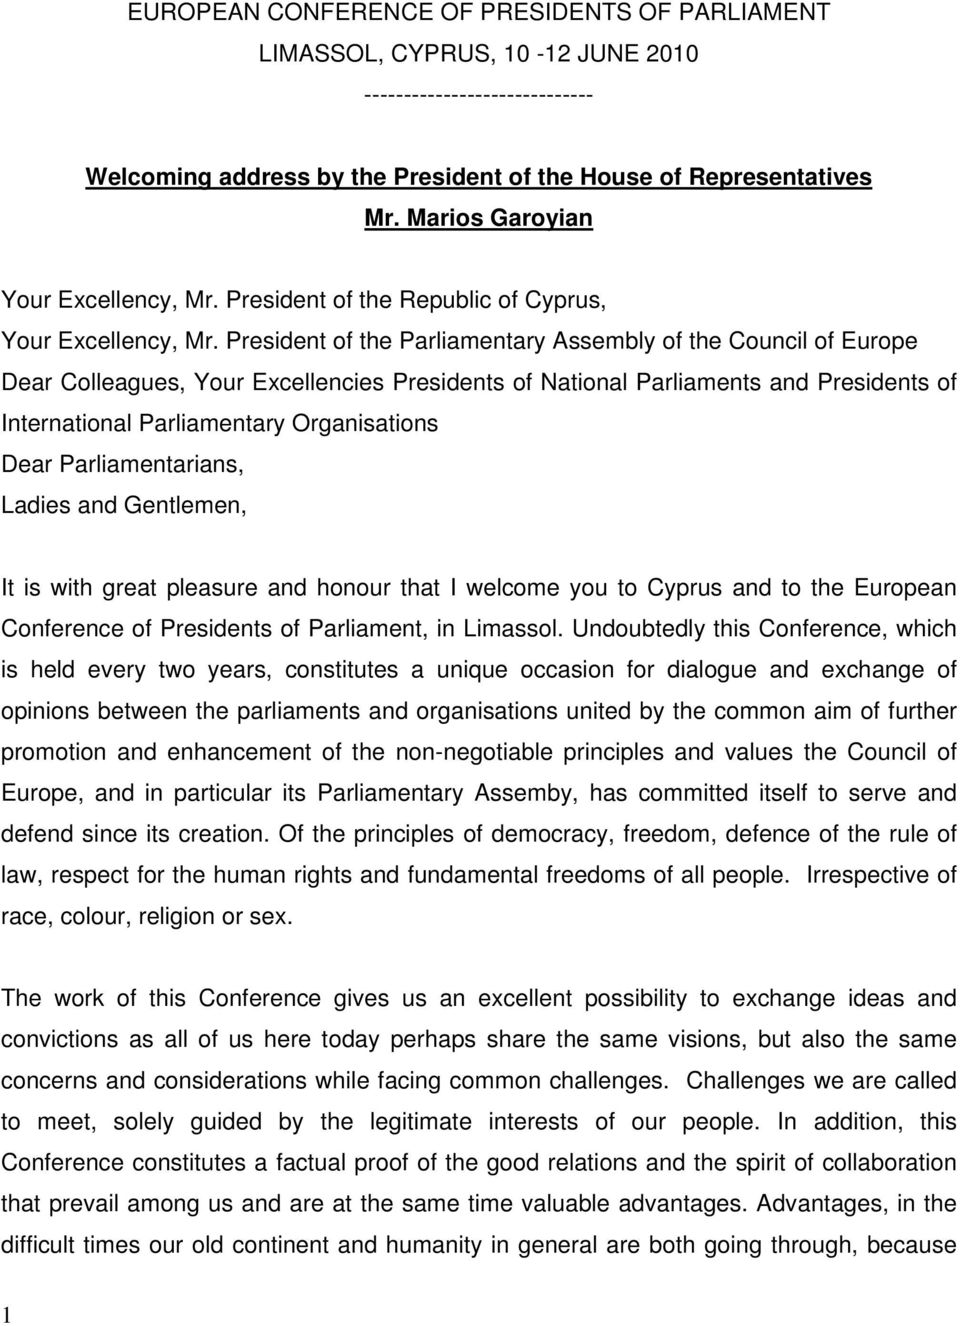 President of the Parliamentary Assembly of the Council of Europe Dear Colleagues, Your Excellencies Presidents of National Parliaments and Presidents of International Parliamentary Organisations Dear